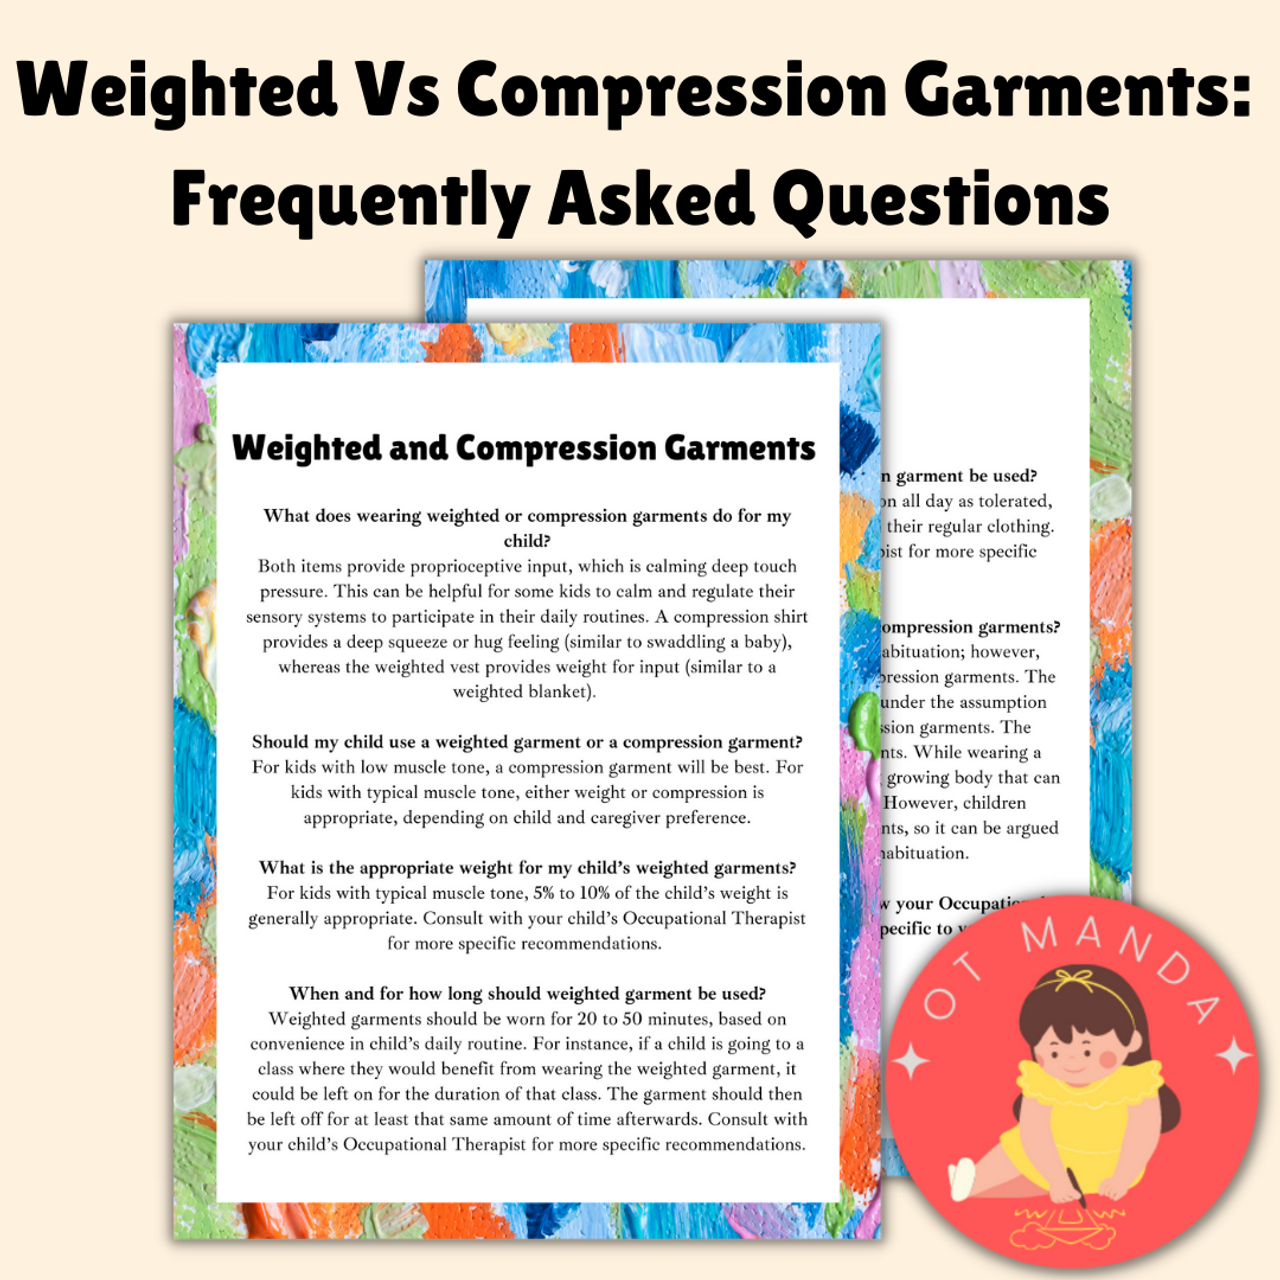 Weighted Vest Vs Compression Garments Frequently Asked Questions for Use | Pediatric Occupational Therapy Caregiver and Teacher Handout